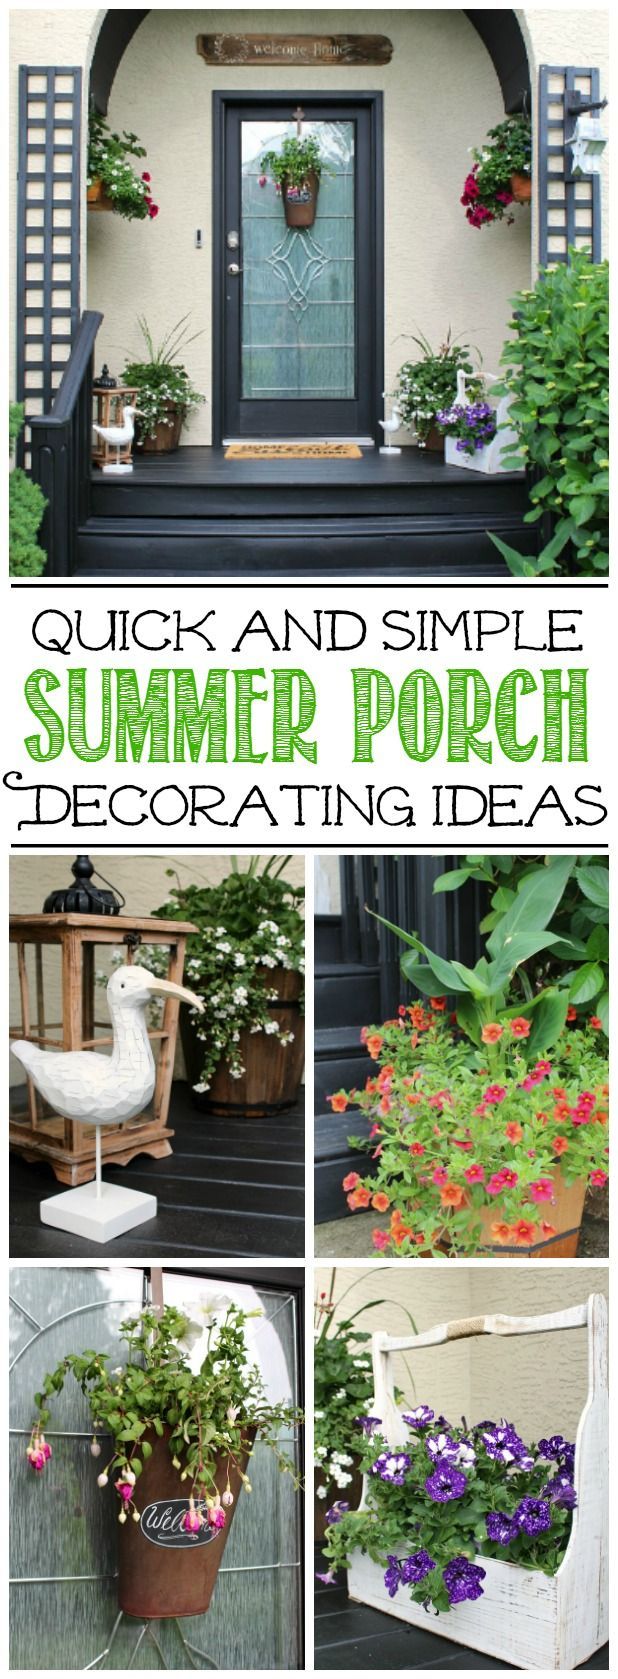 Simple summer decorating ideas for your front porch or patio. Beautiful!